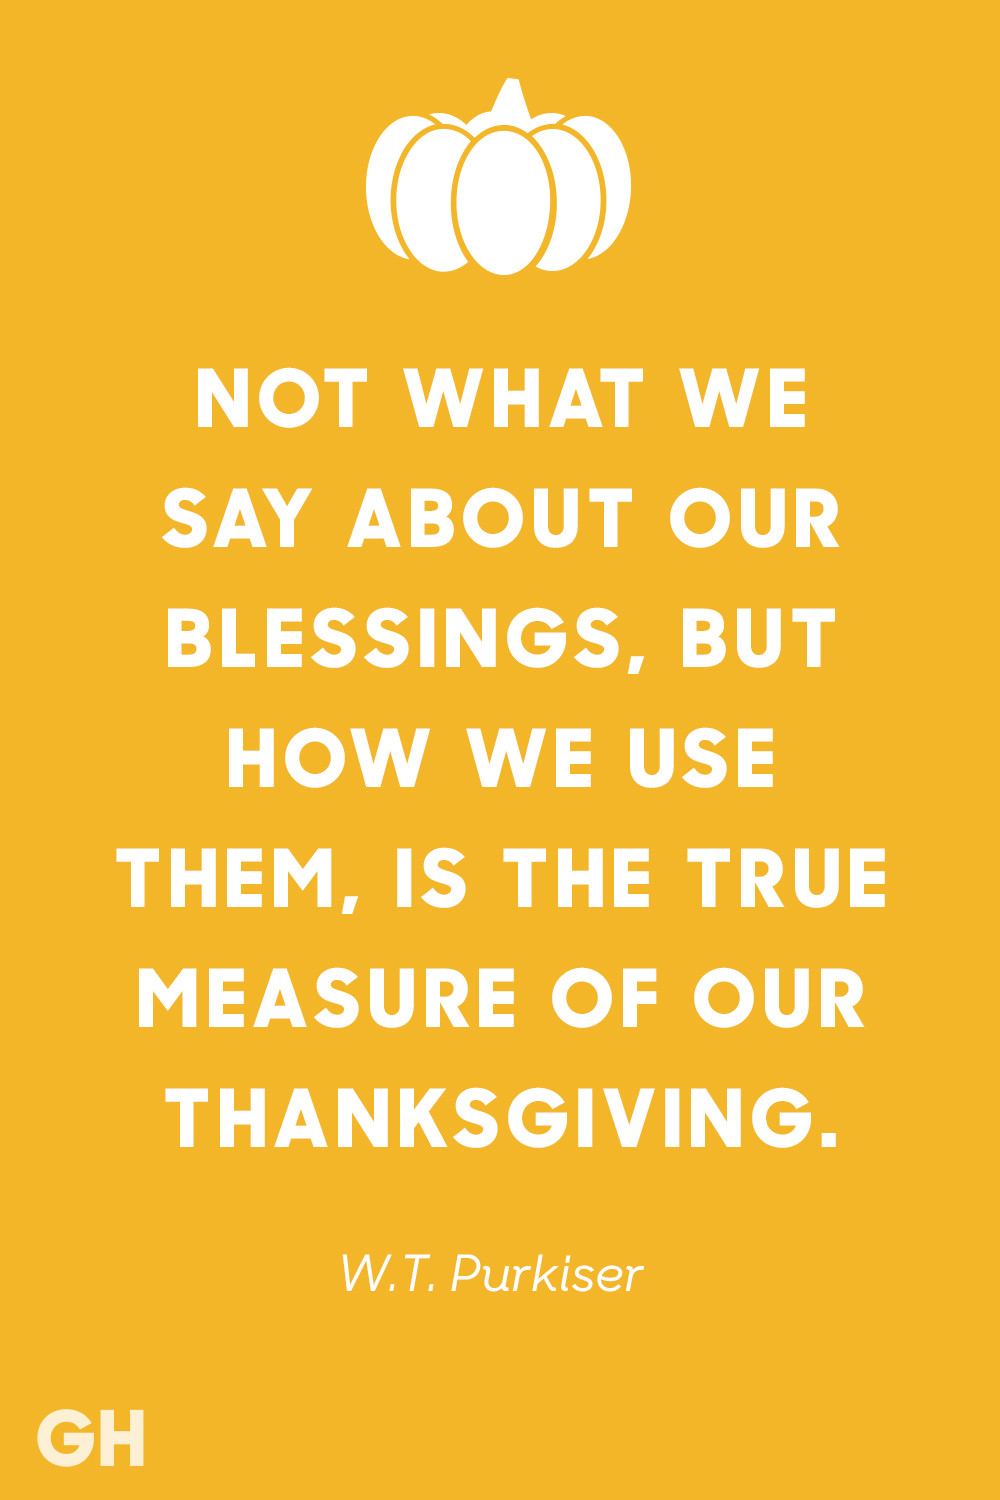 Famous Thanksgiving Quotes
 15 Best Thanksgiving Quotes Inspirational and Funny